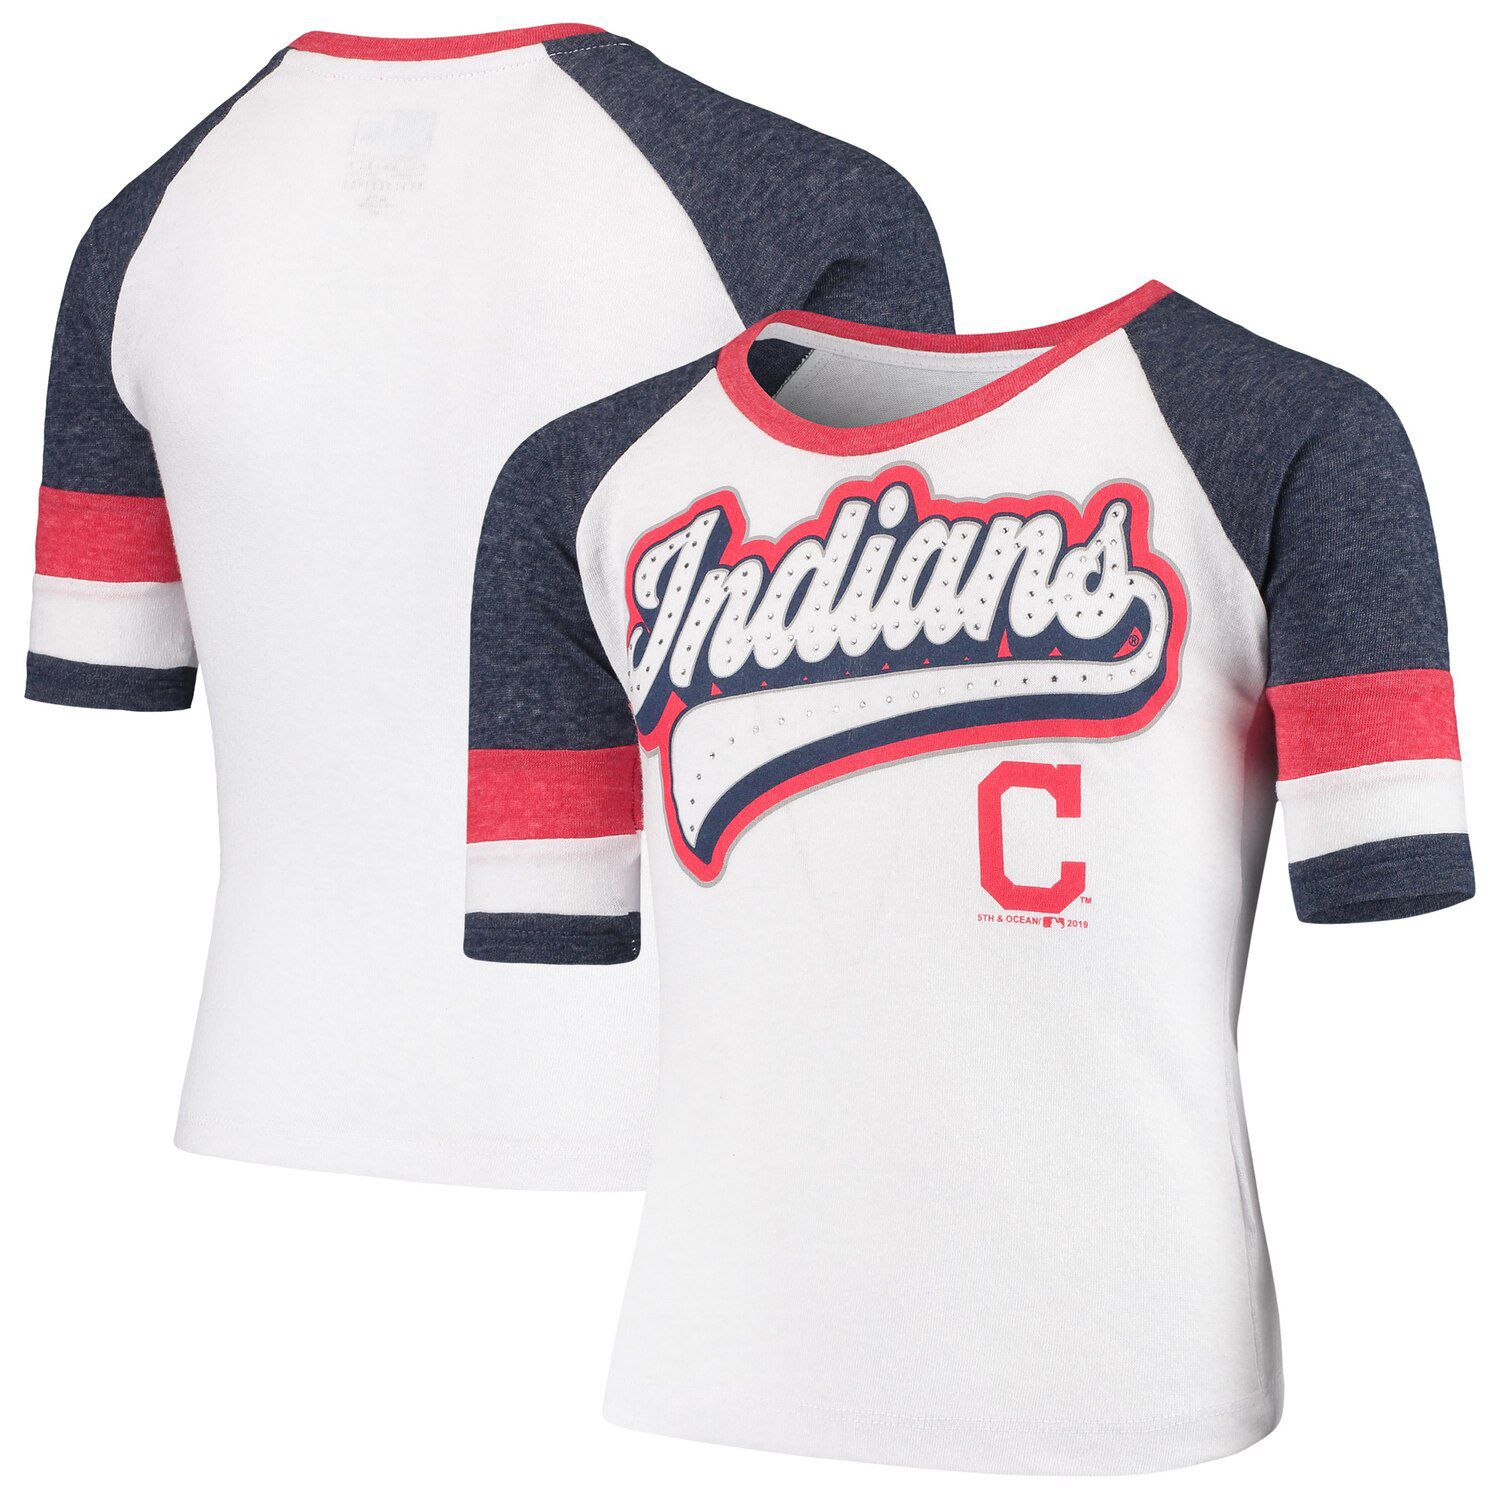 new cleveland indians jersey